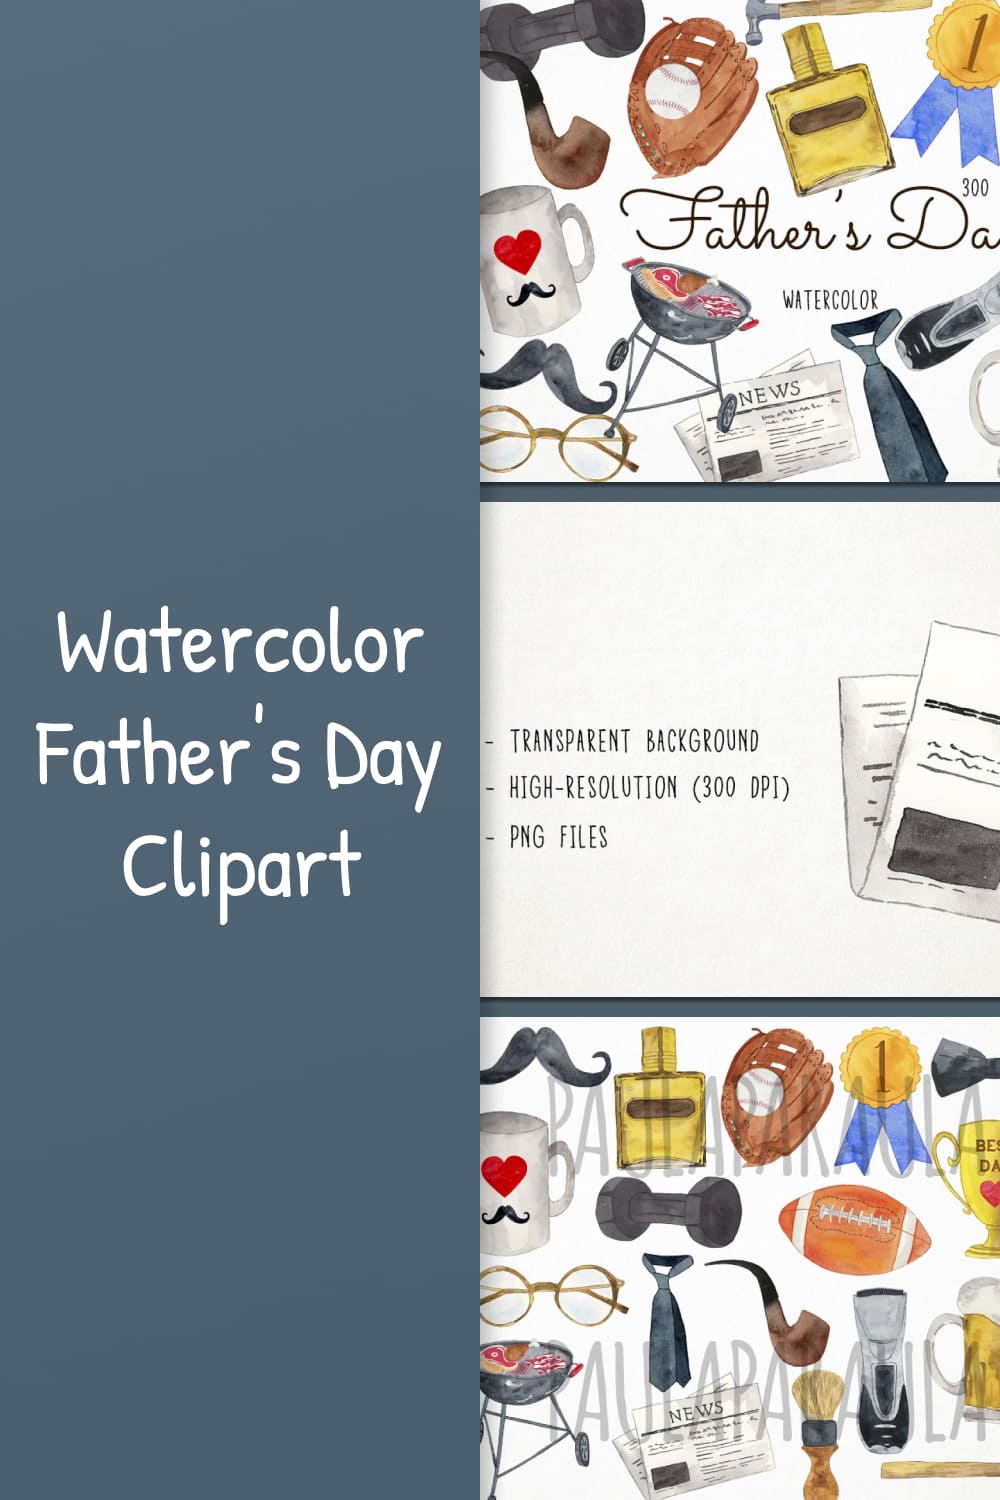 Watercolor father s day clipart - pinterest image preview.